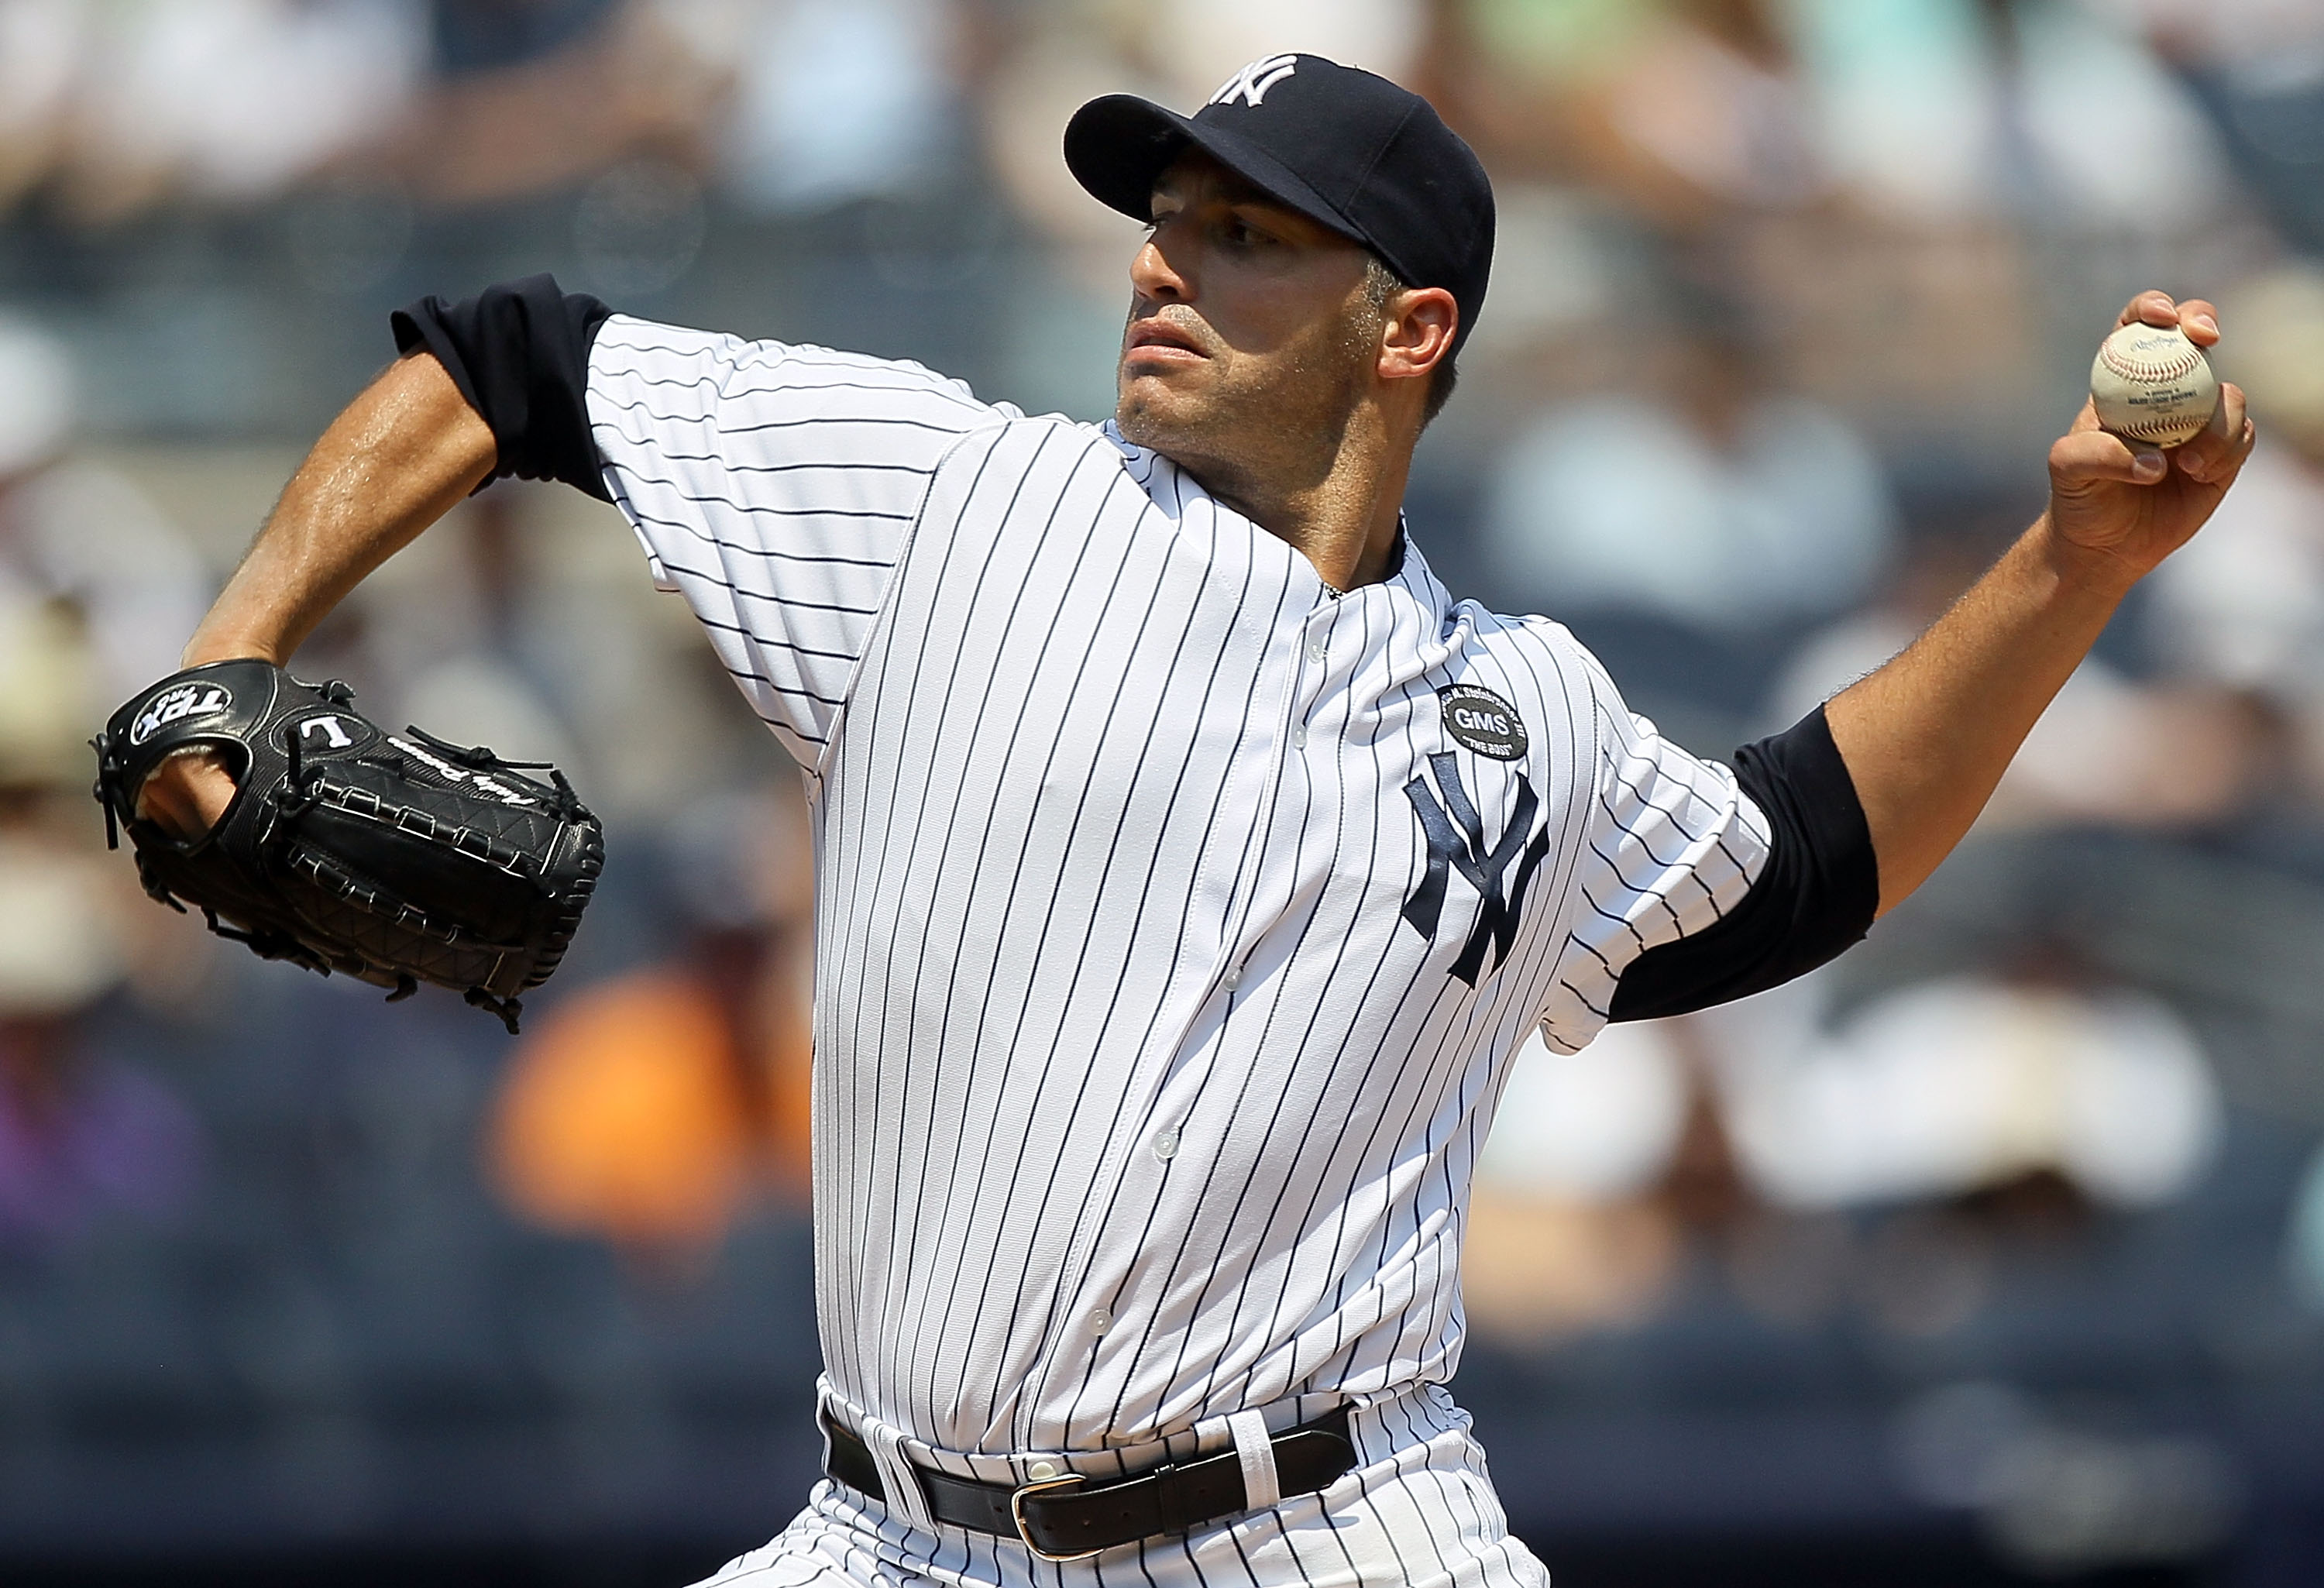 Andy Pettitte To Retire: Pedro Martinez and 10 Best Options for